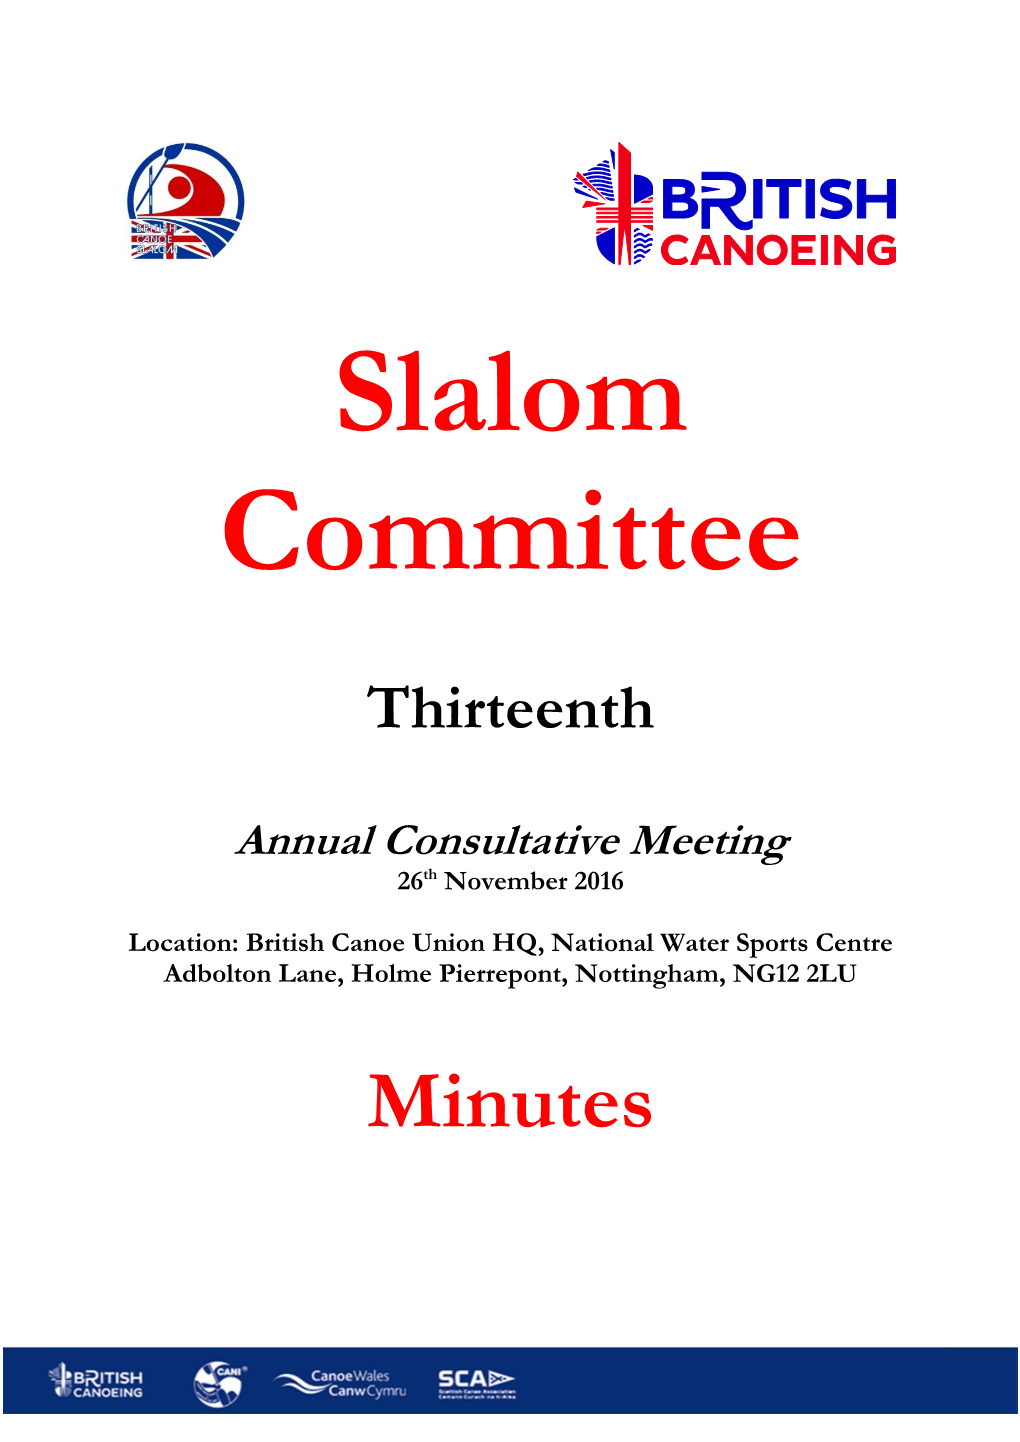 Slalom Committee Meetings Were Tabled for Information